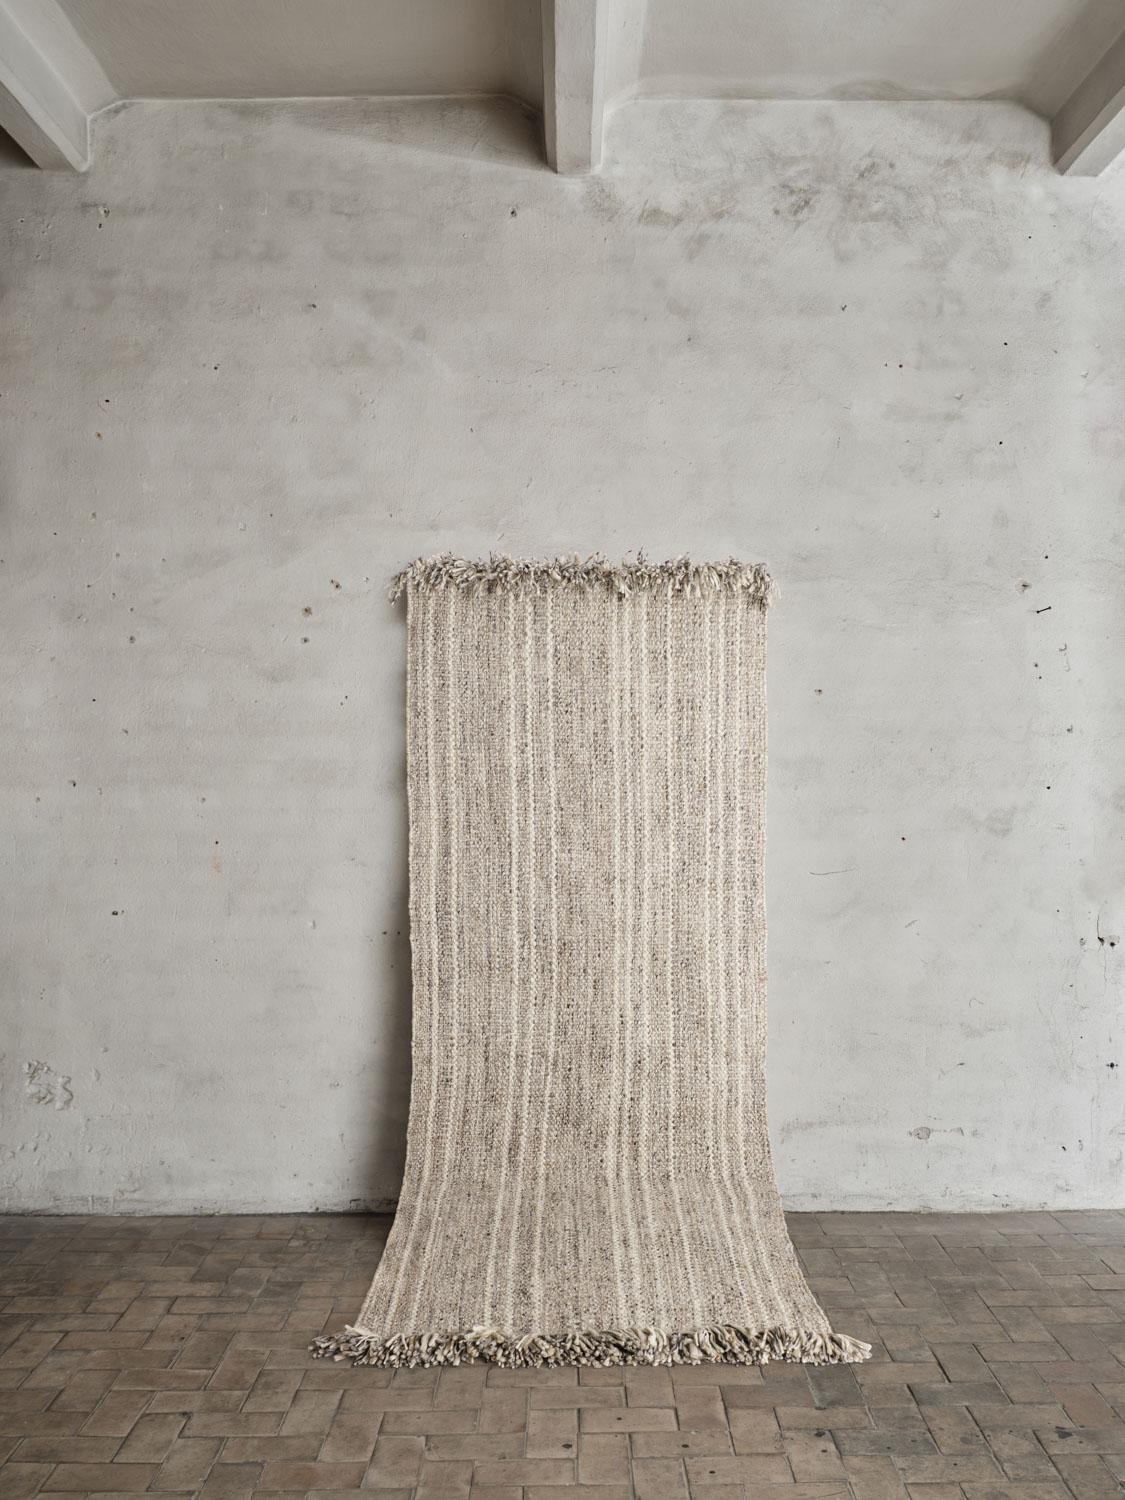 Colonnade no.07 Rug by Cappelen Dimyr
Dimensions: D 100 x H 240 cm
Materials: 100% Wool 

Colonnade no.07 is a hand-woven wool rug designed for narrow  spaces.  no.07 has a mid beige melange foundation with a soft sandy shaded stripe, creating a